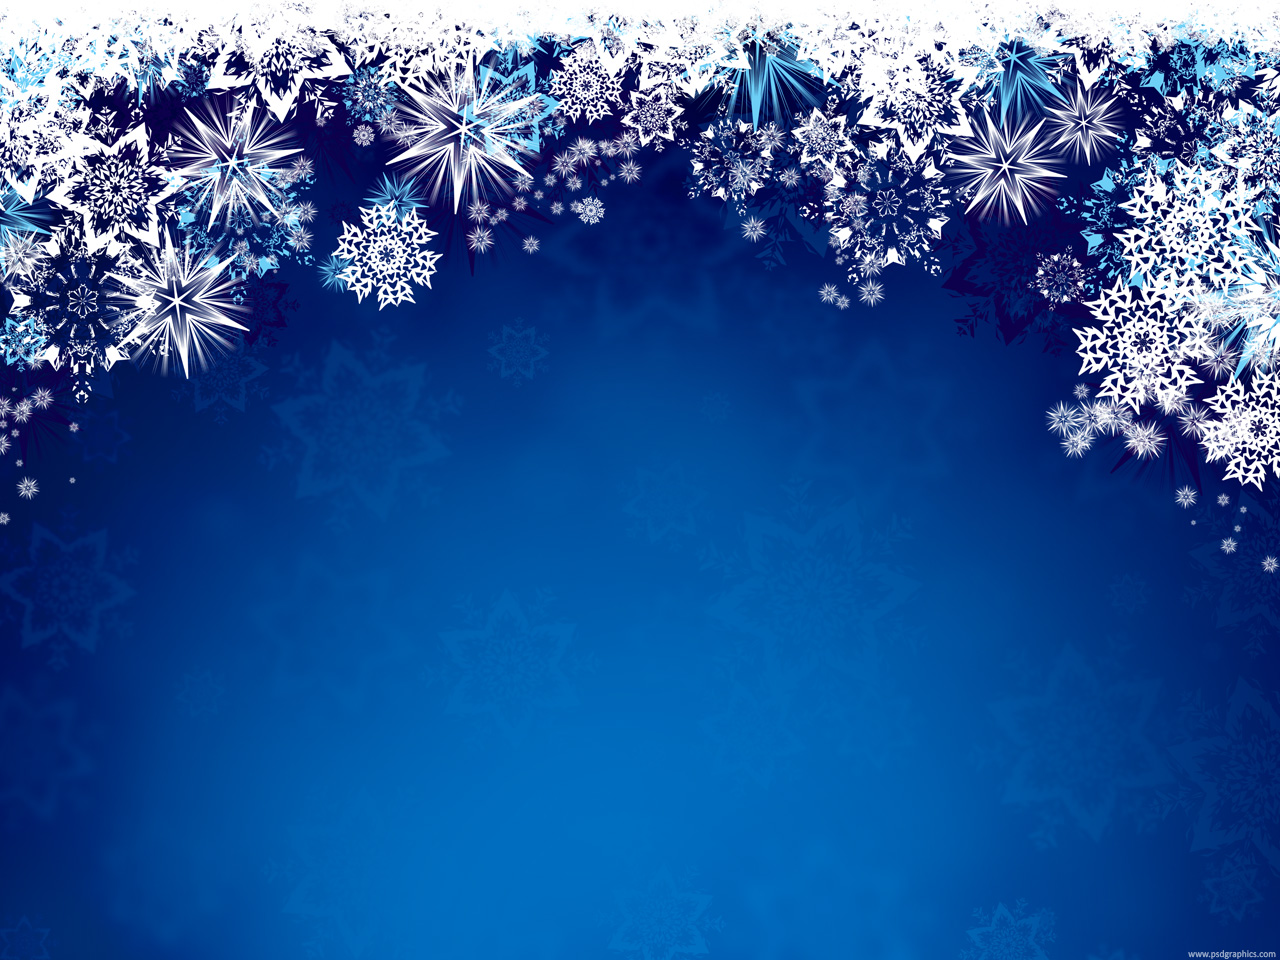 14 Winter-Themed Graphic Design Images